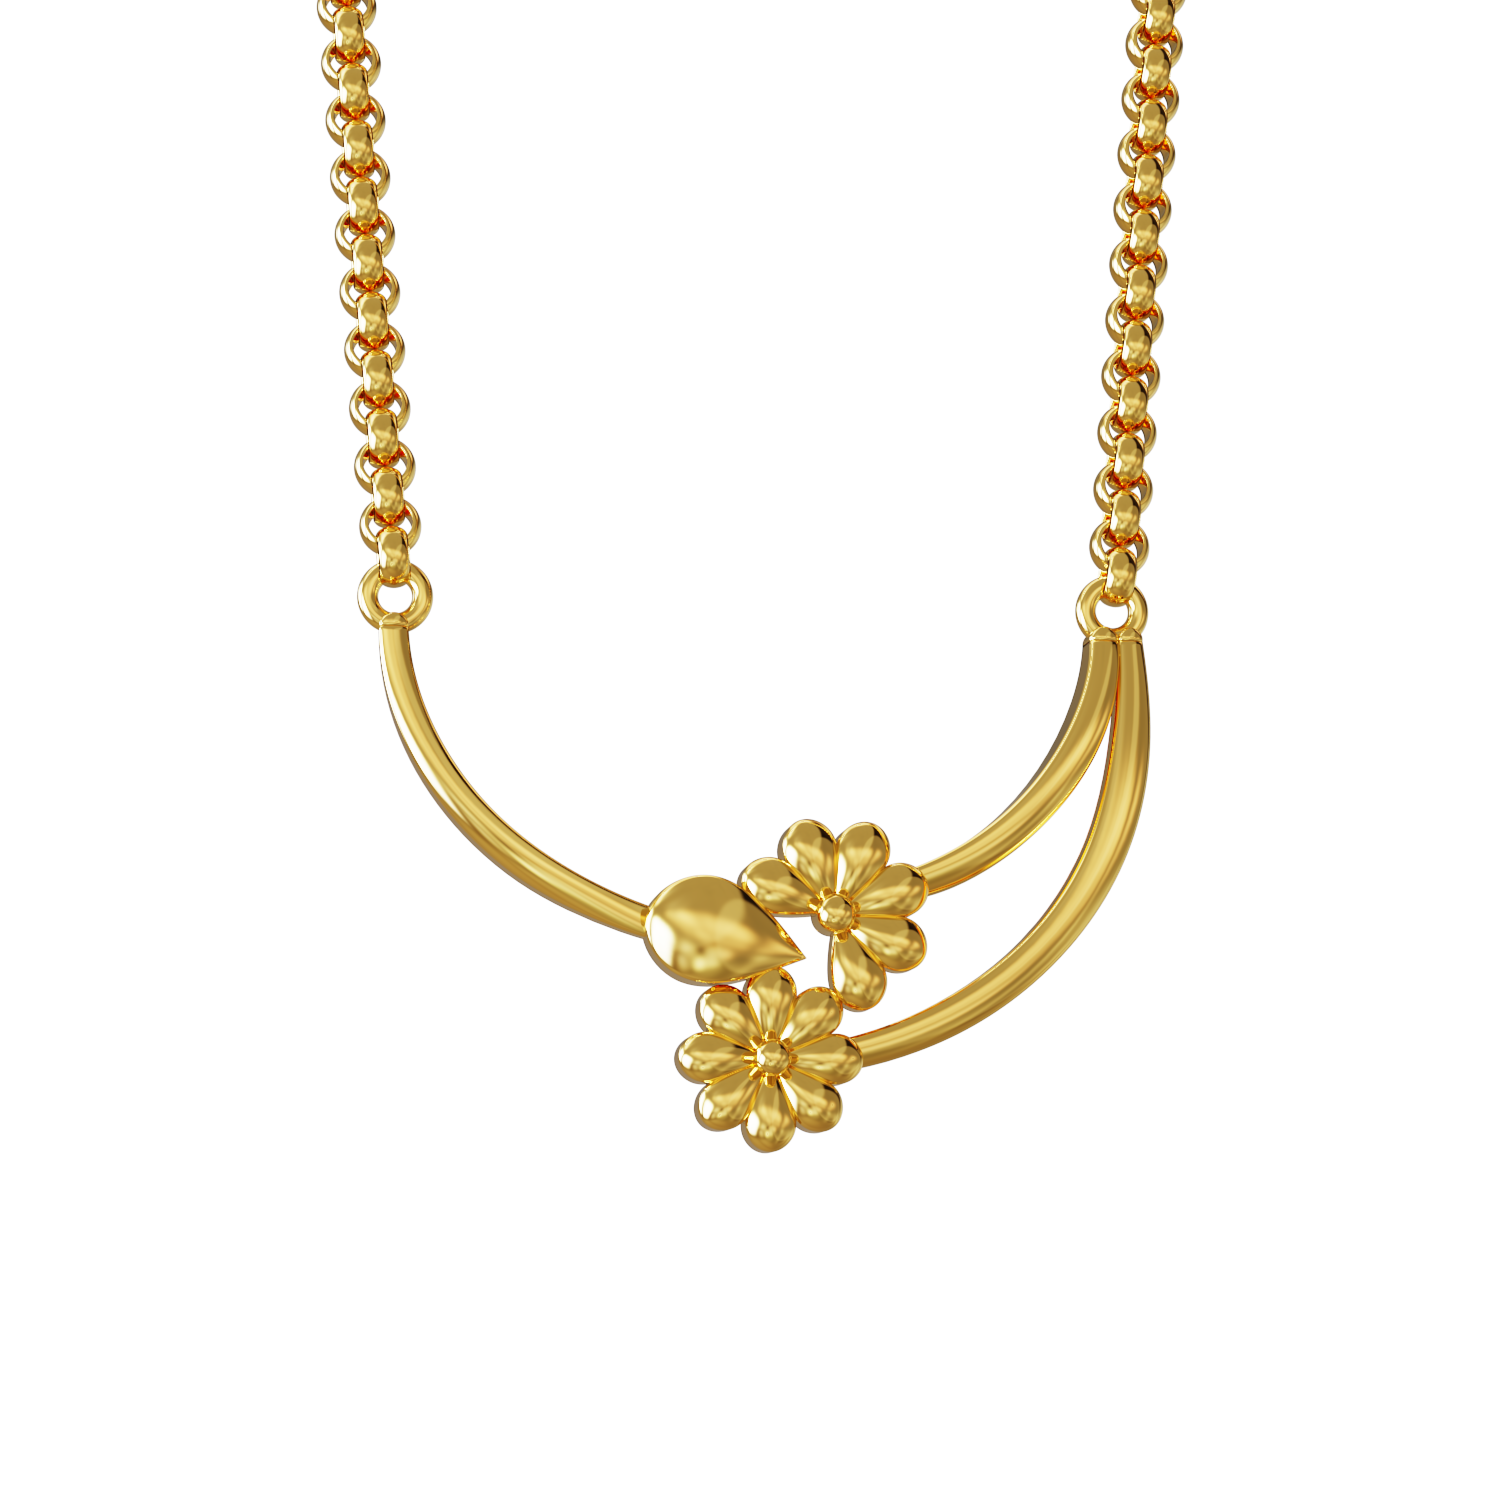 Light weight necklace collection by SBJ - Indian Jewellery Designs